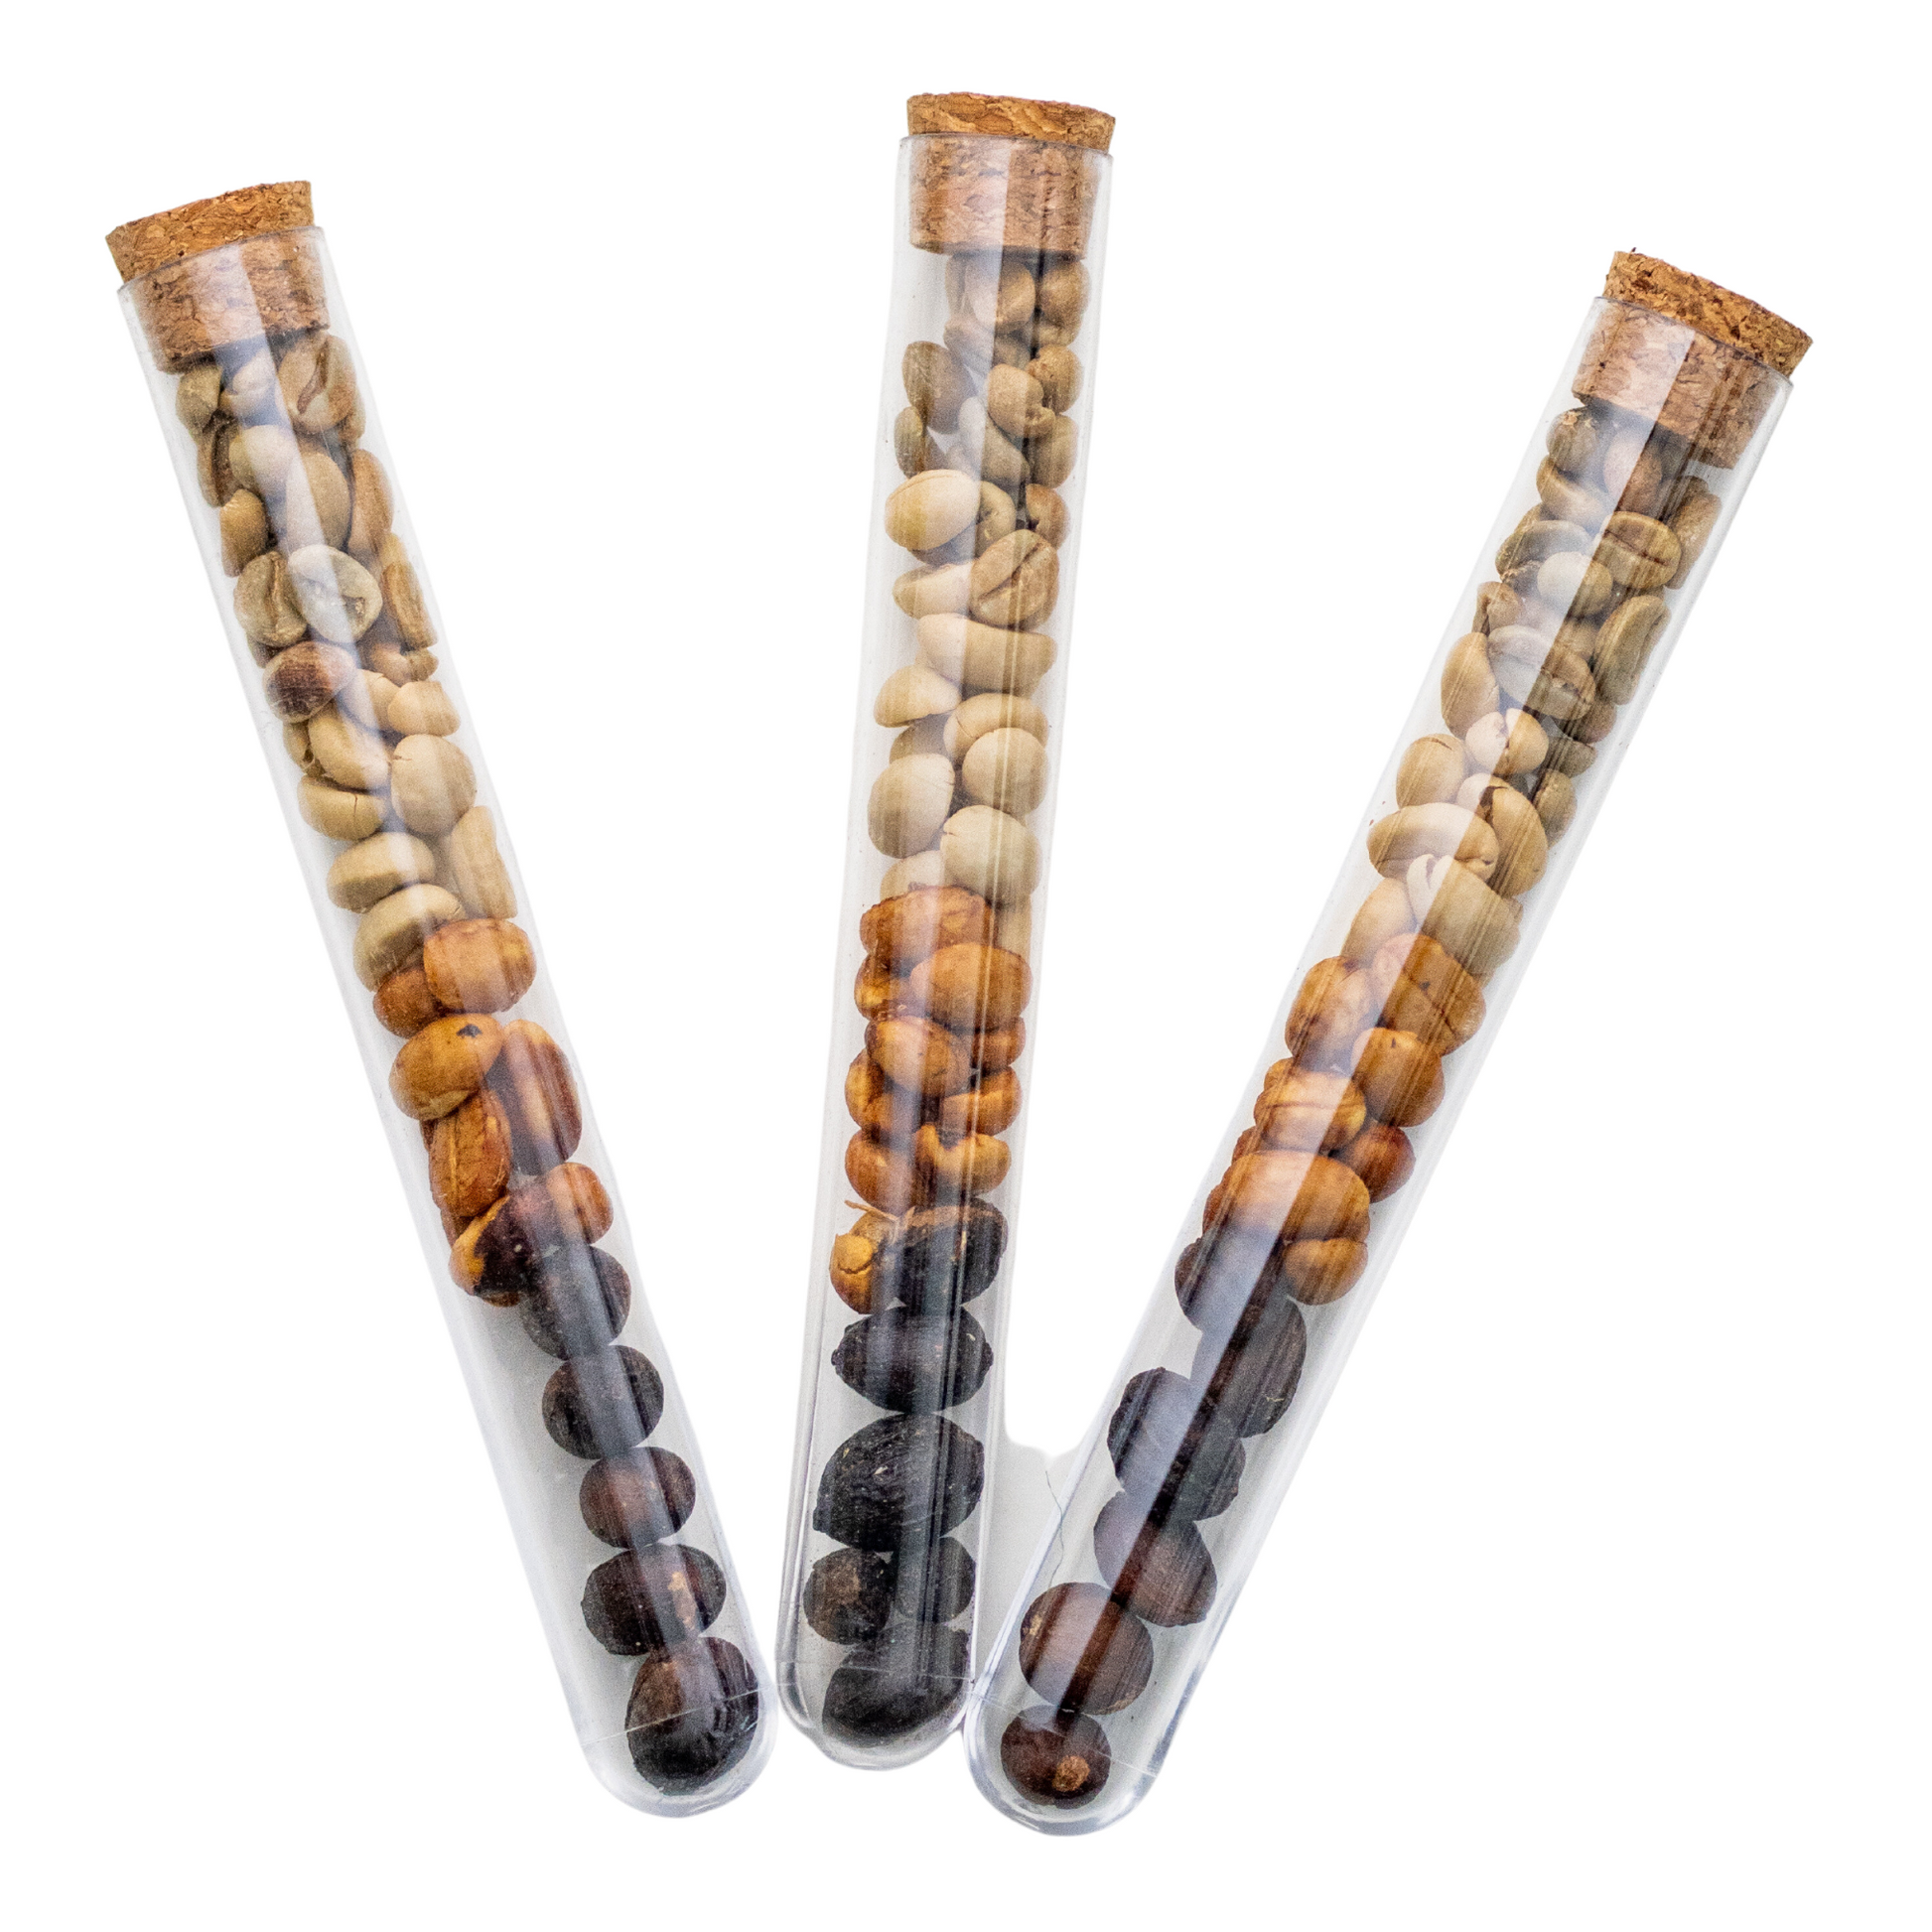 alma coffee processing vial with wet wash, honey process, and natural process